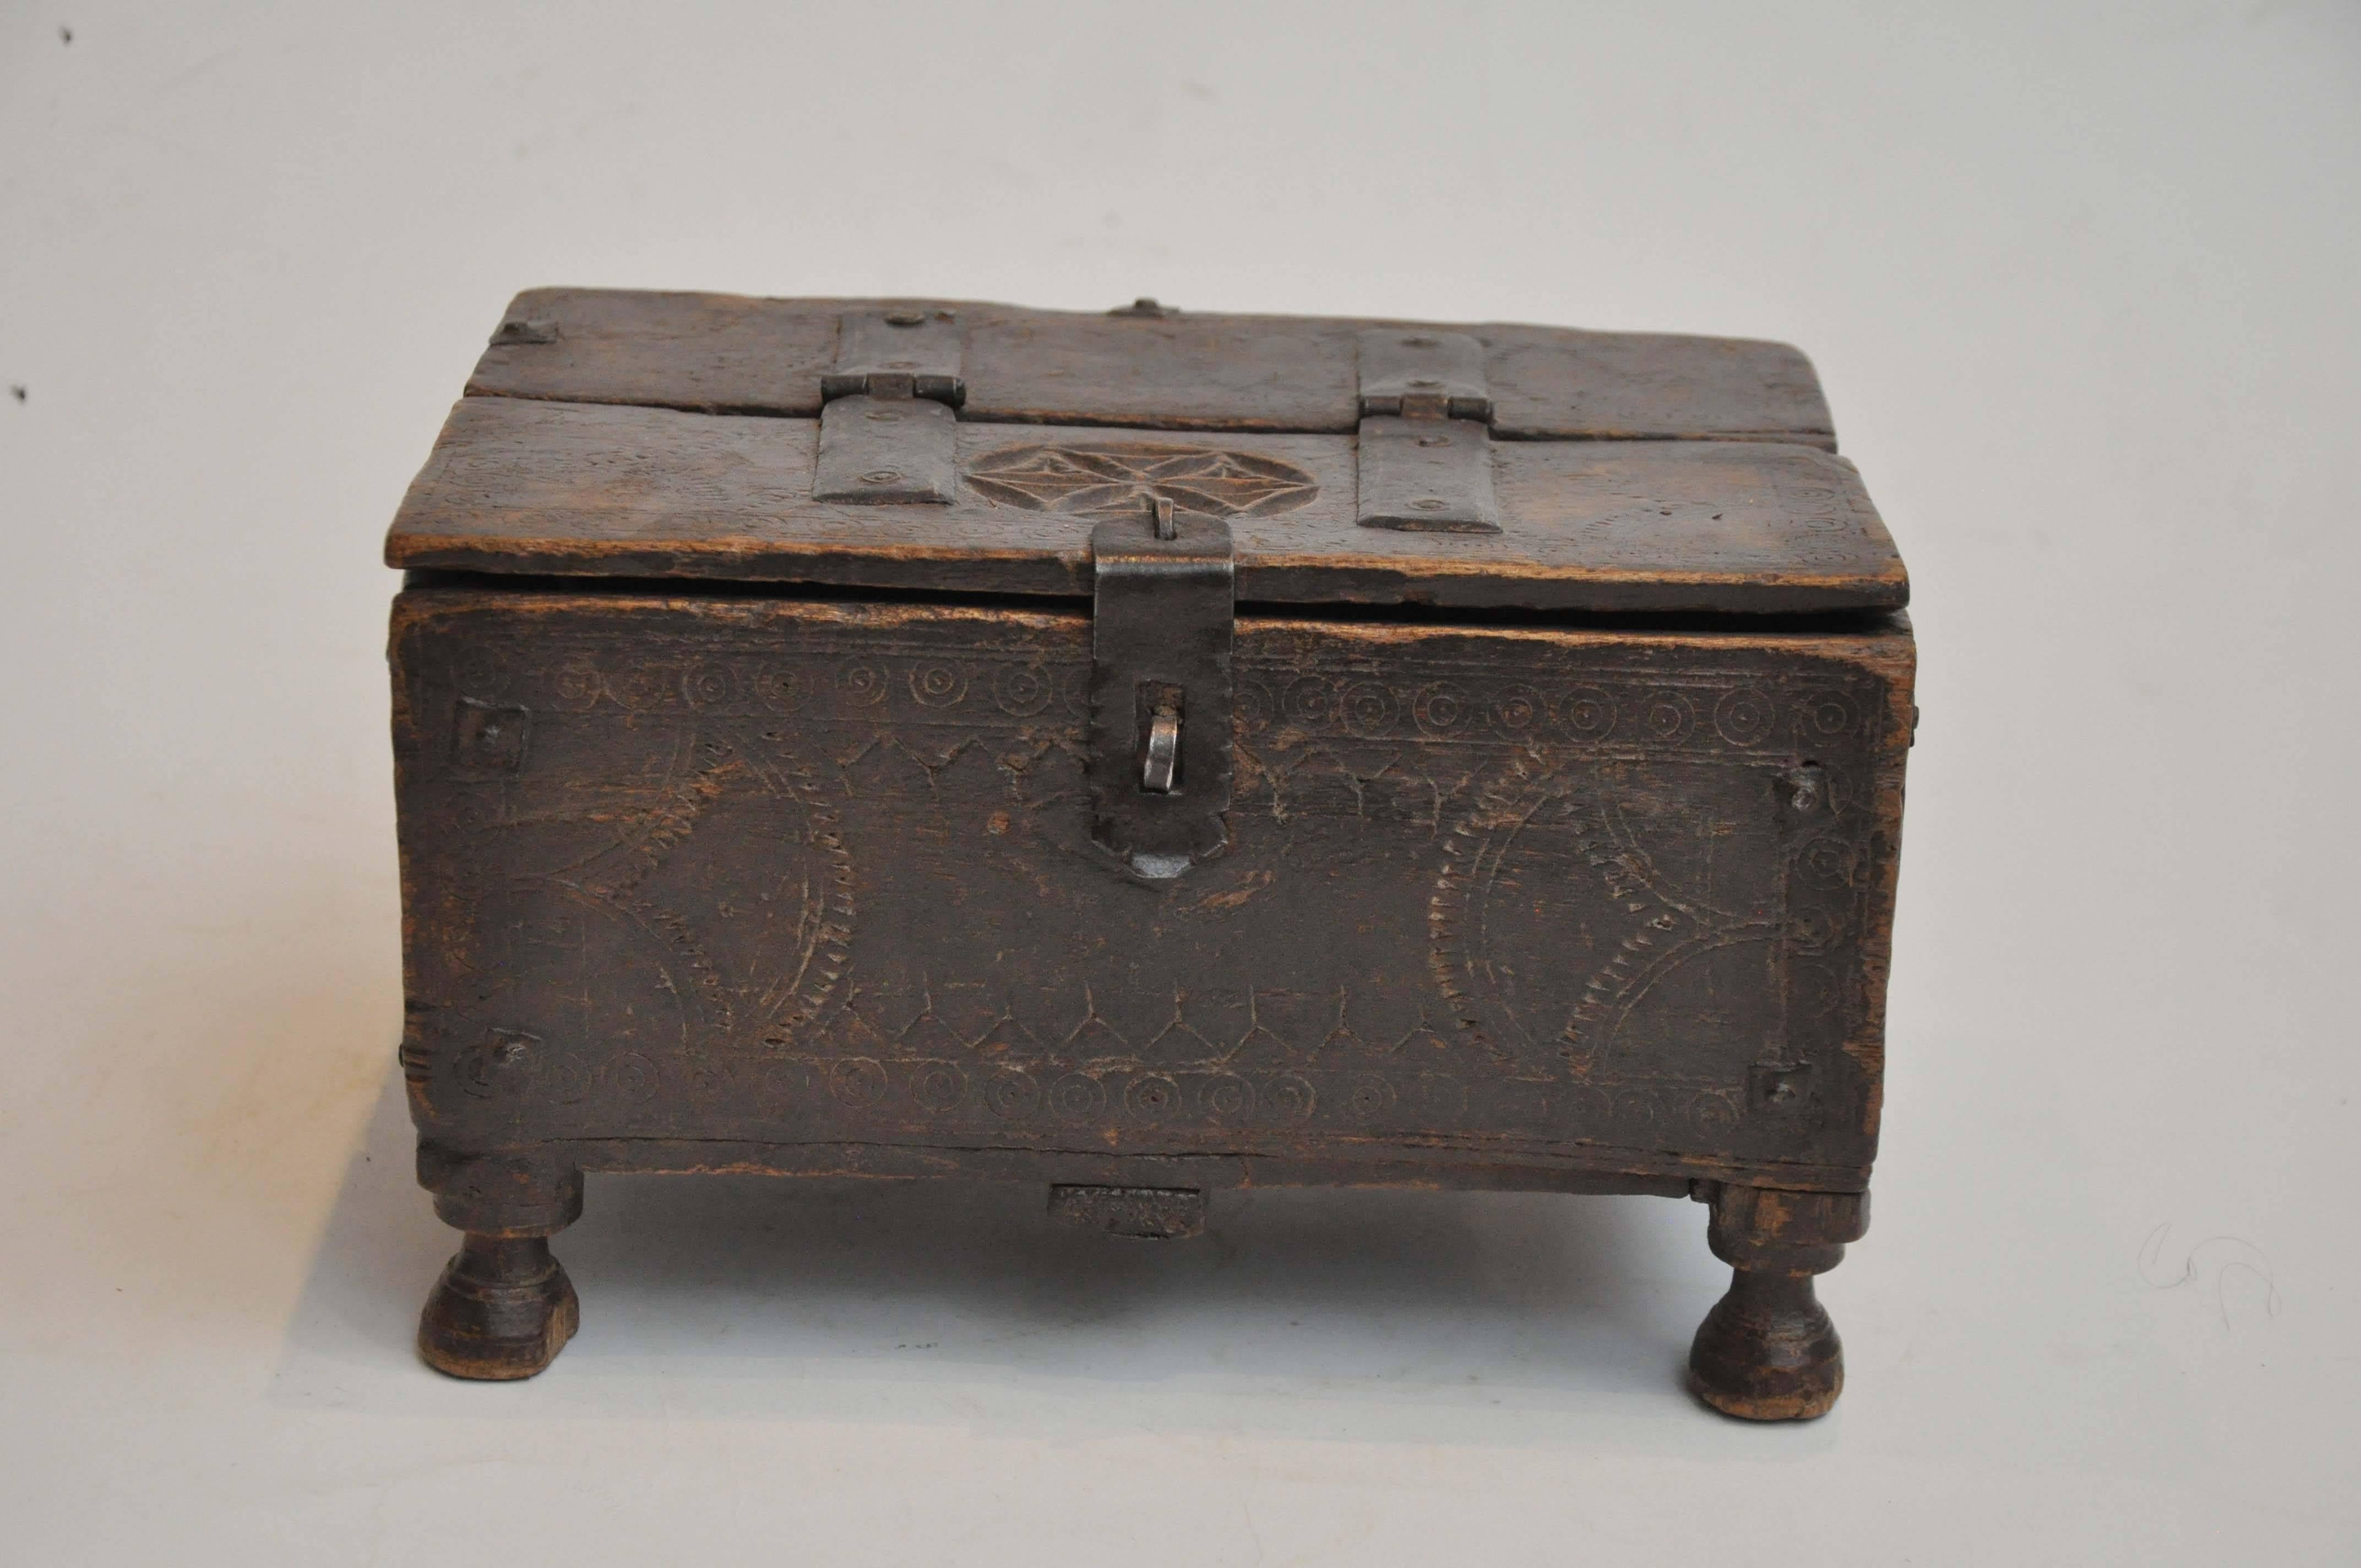 Late 19th century Moroccan footed box. Found in Paris. Hand-carved wooden details with metal hinges and latch. Interior is upholstered. Likely a keepsake box. 

Dimensions: 6.75